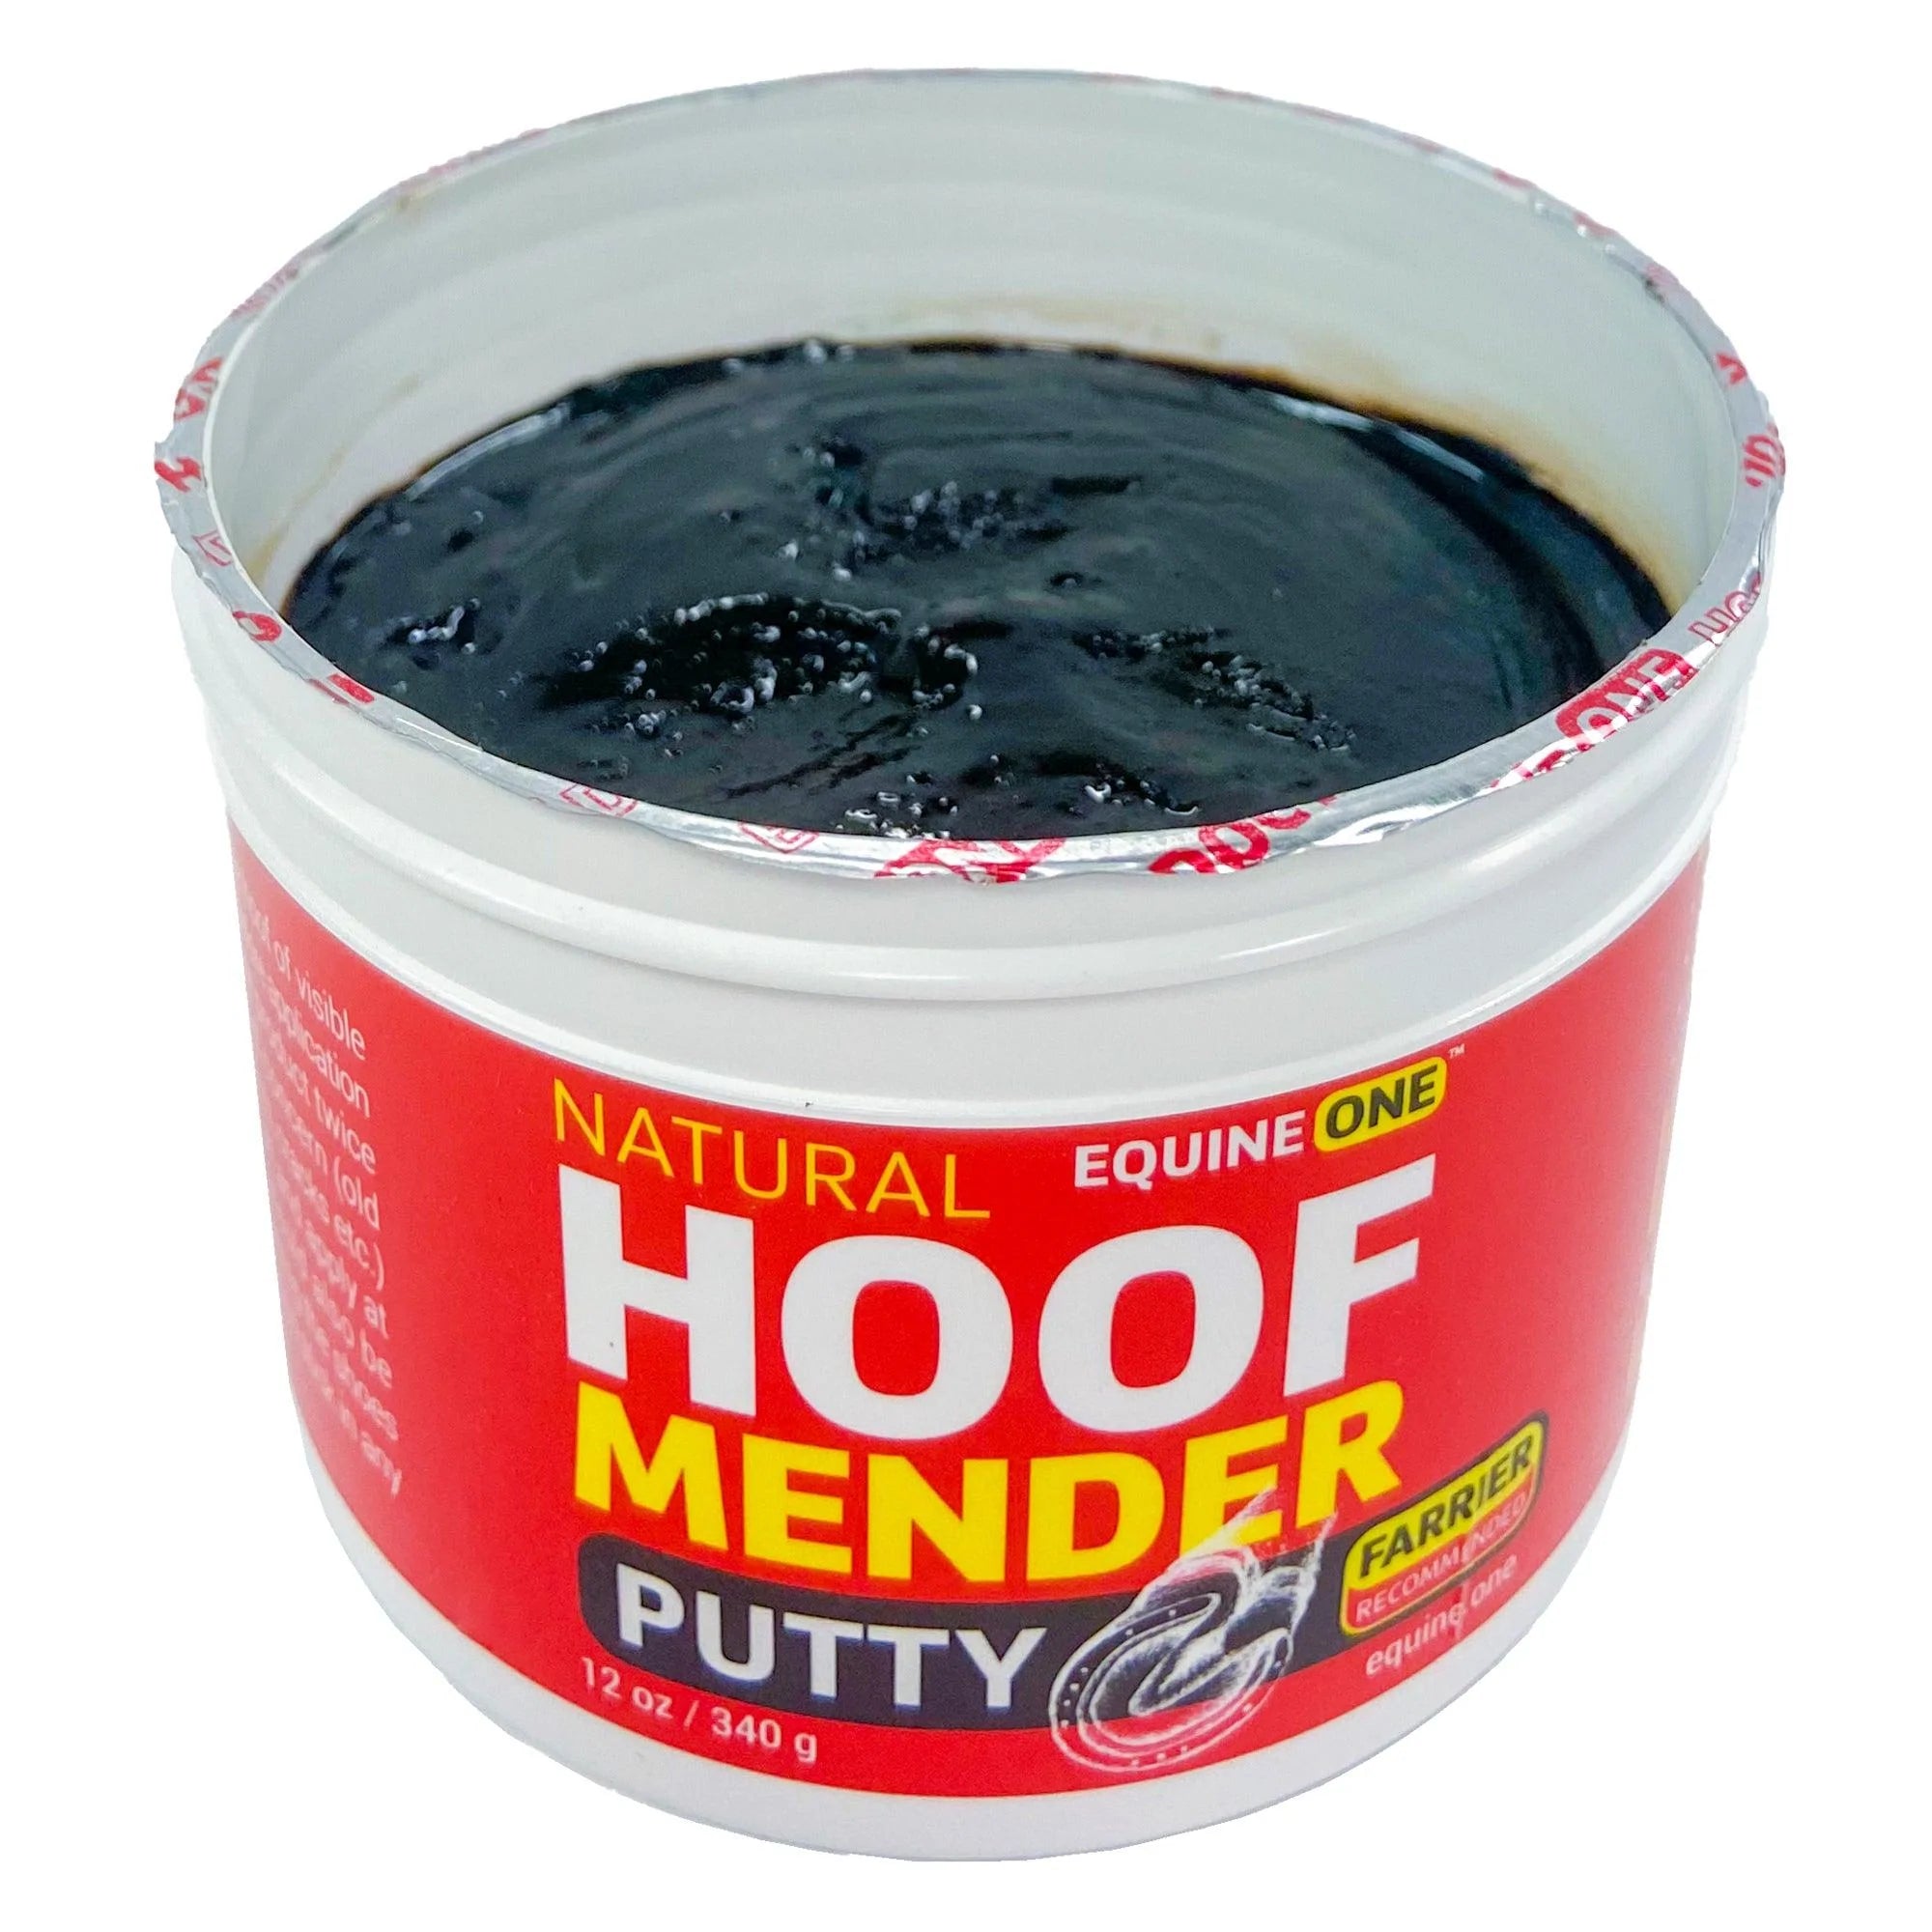 Equine One Hoof Mender Putty - Equine One